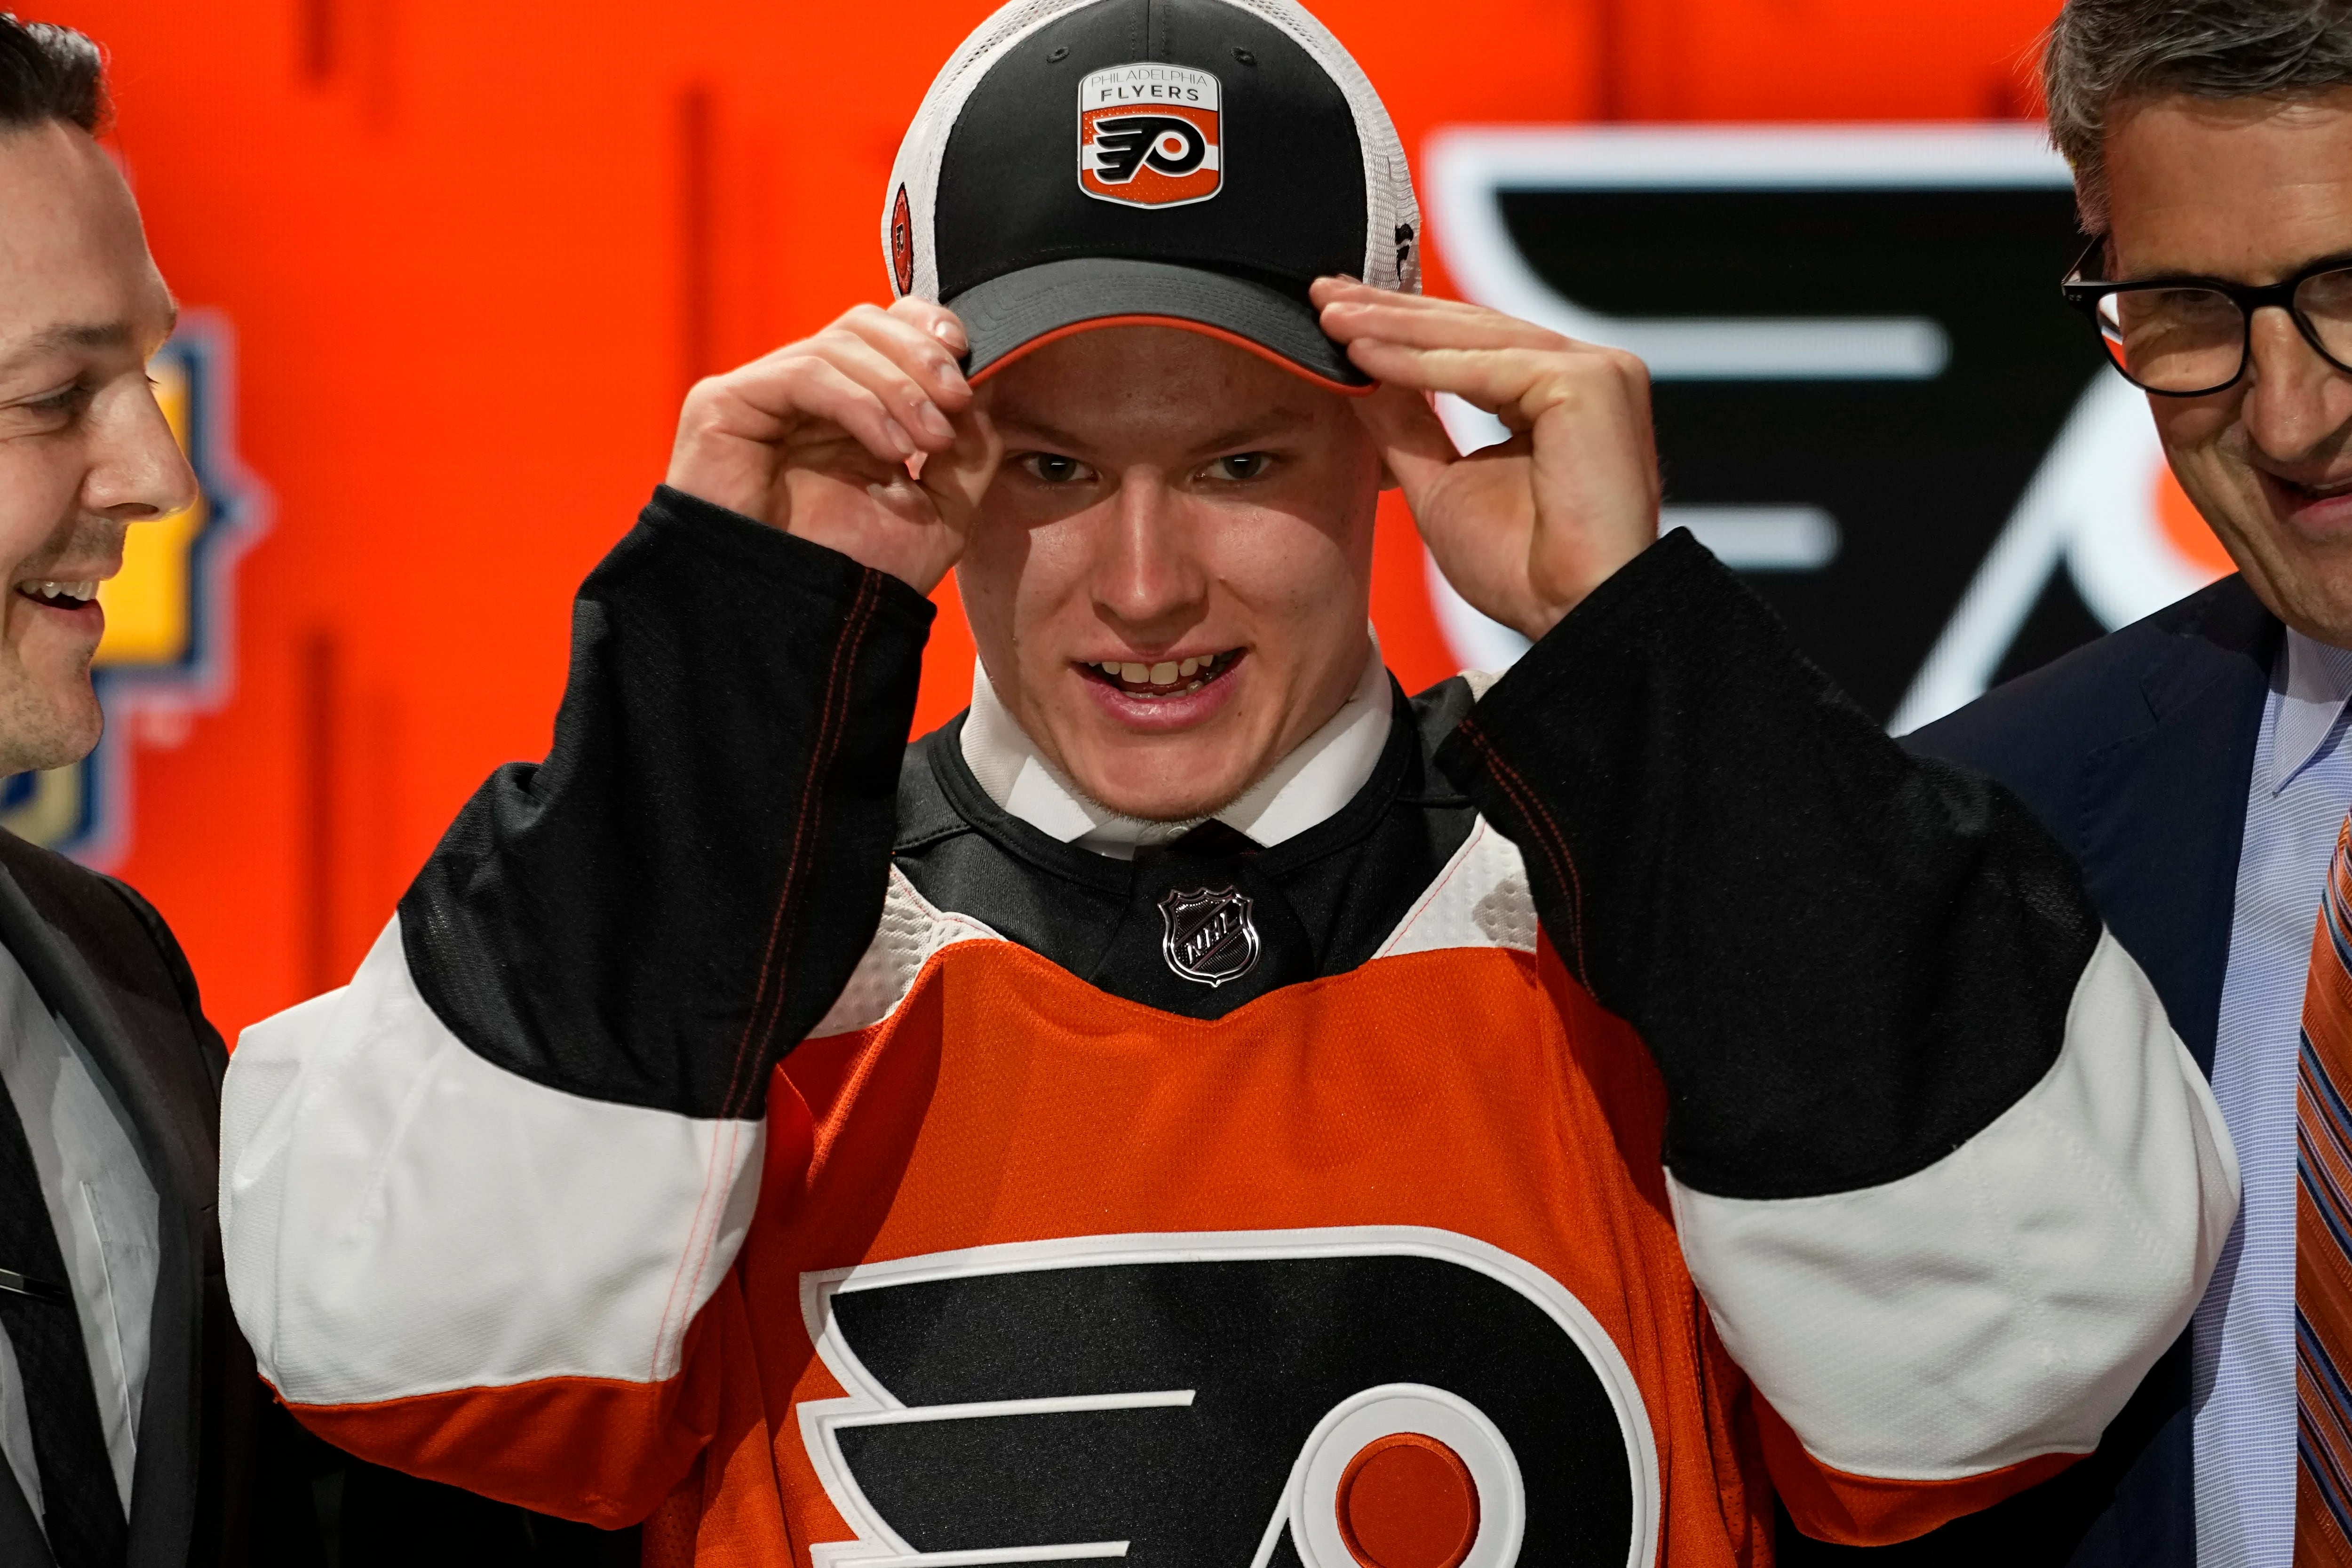 Pros and Cons of Danny Briere as Flyers GM